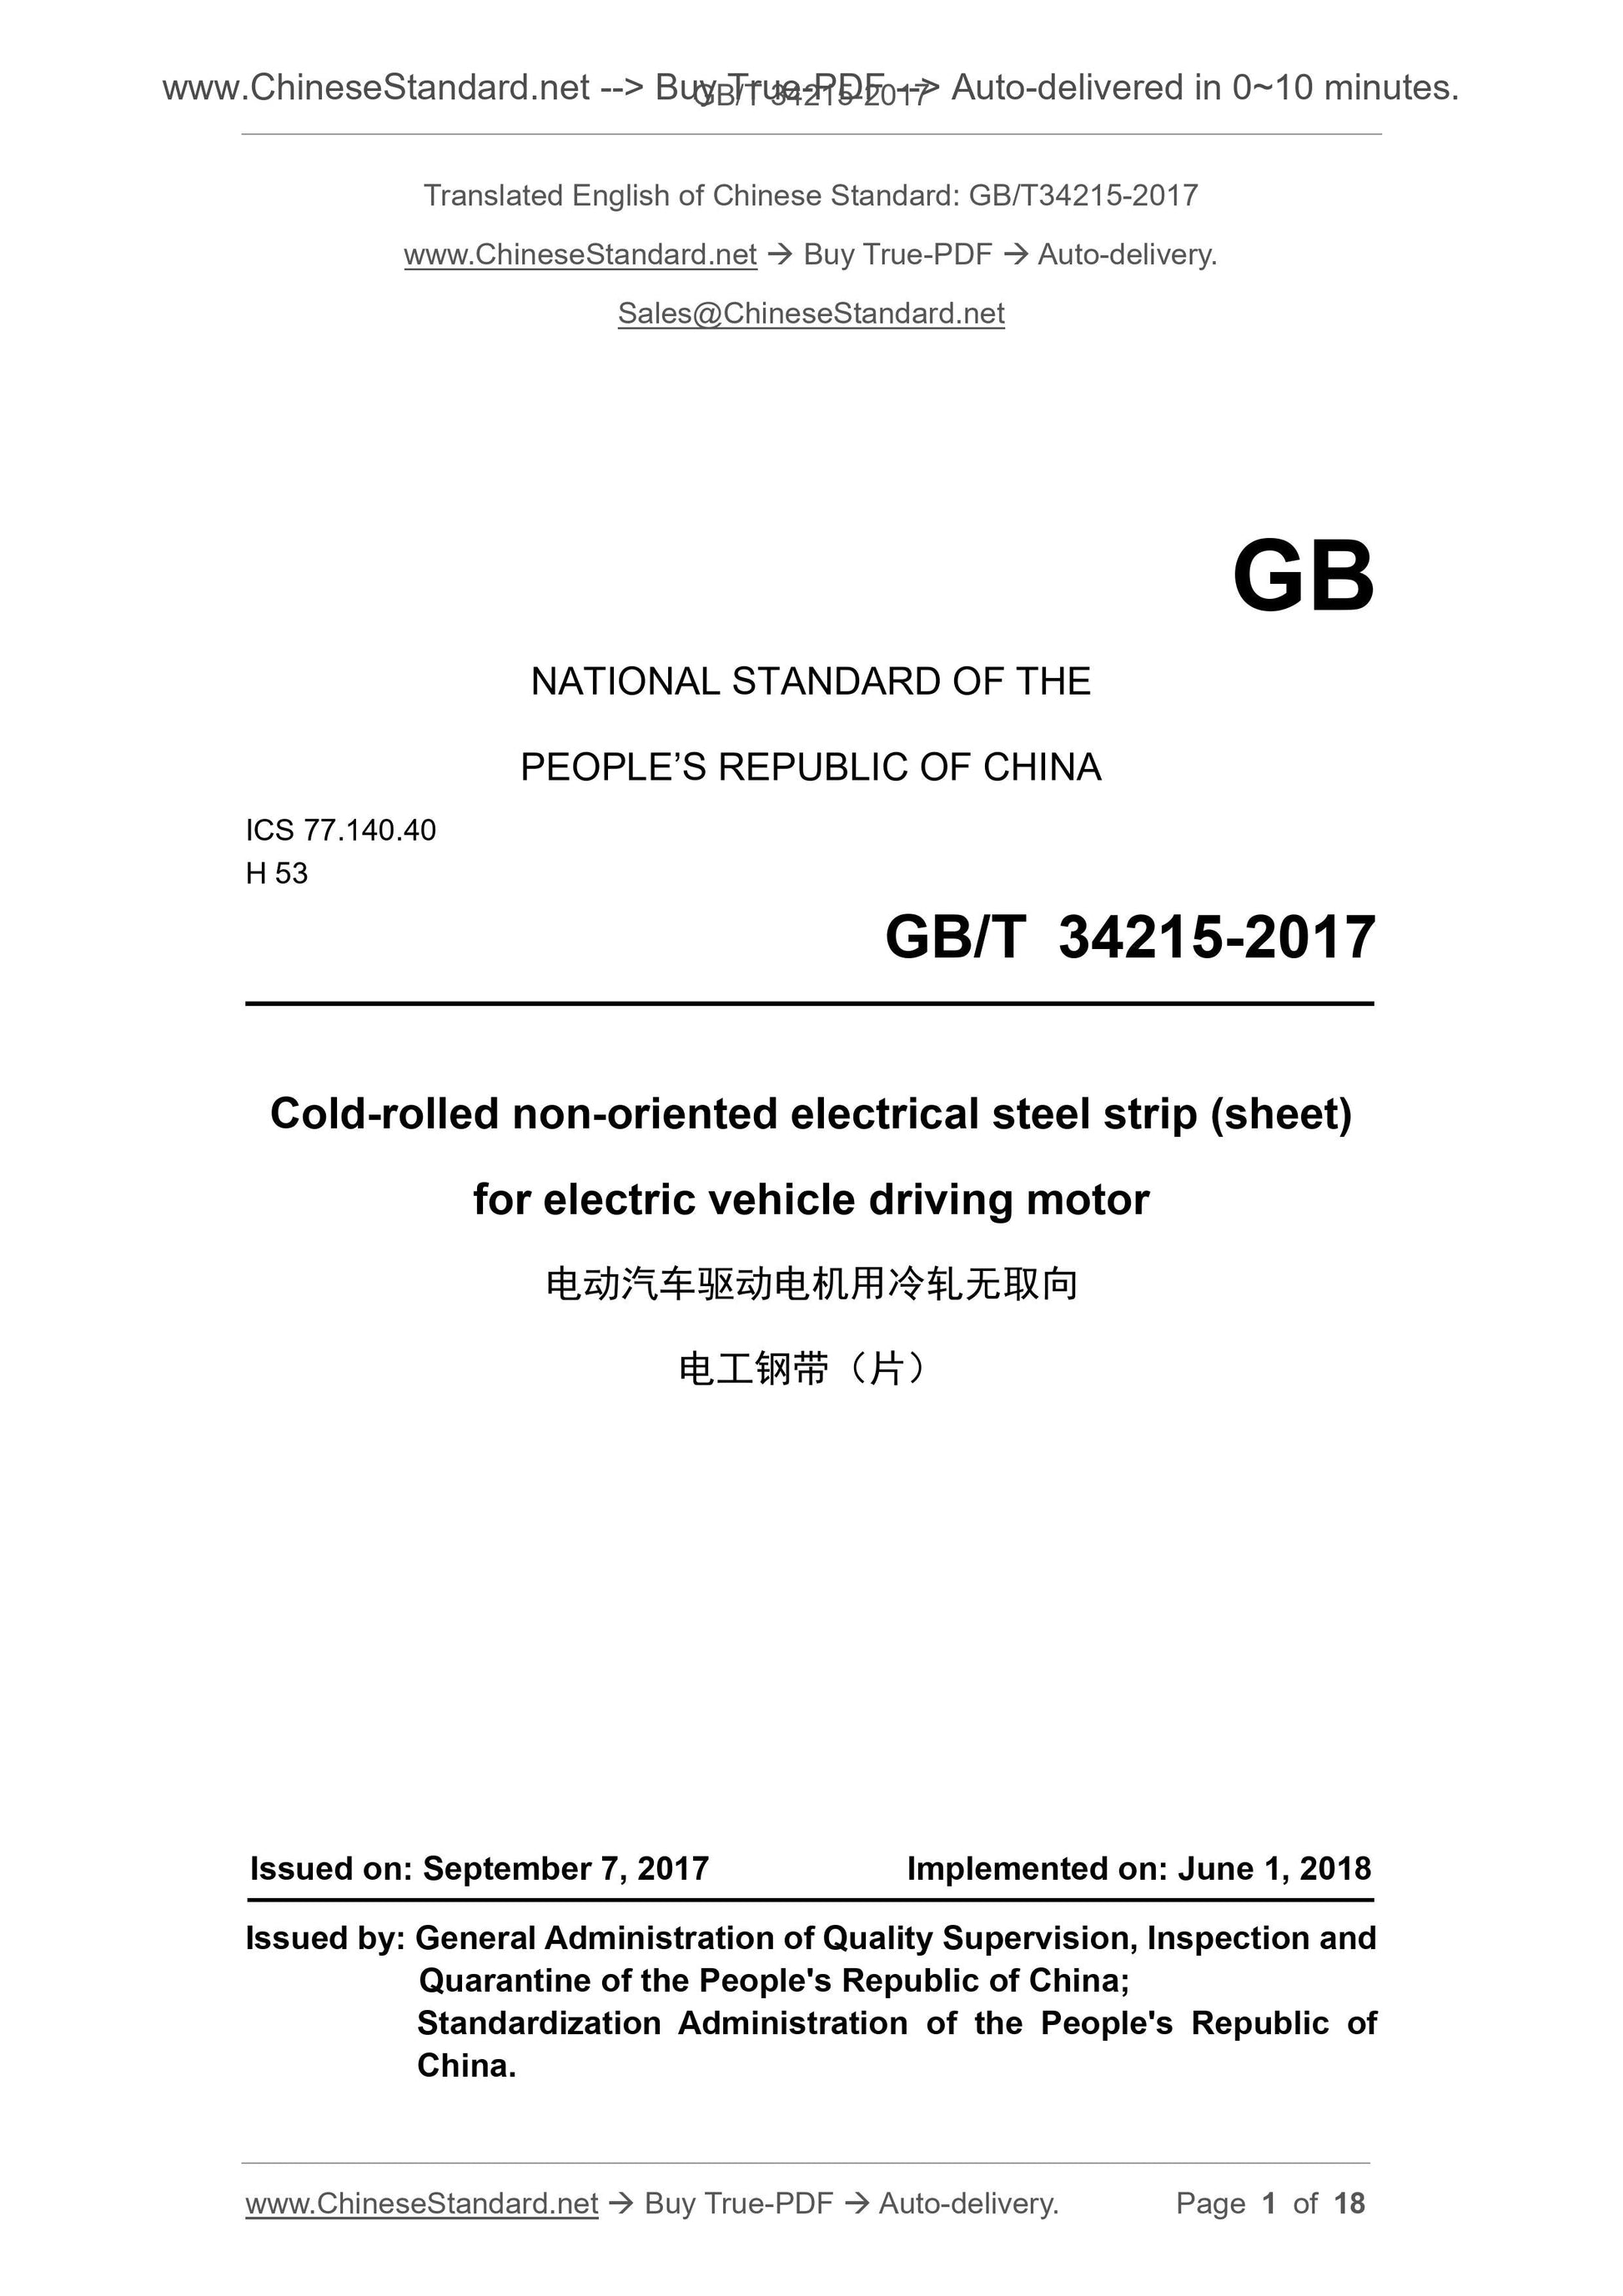 GB/T 34215-2017 Page 1